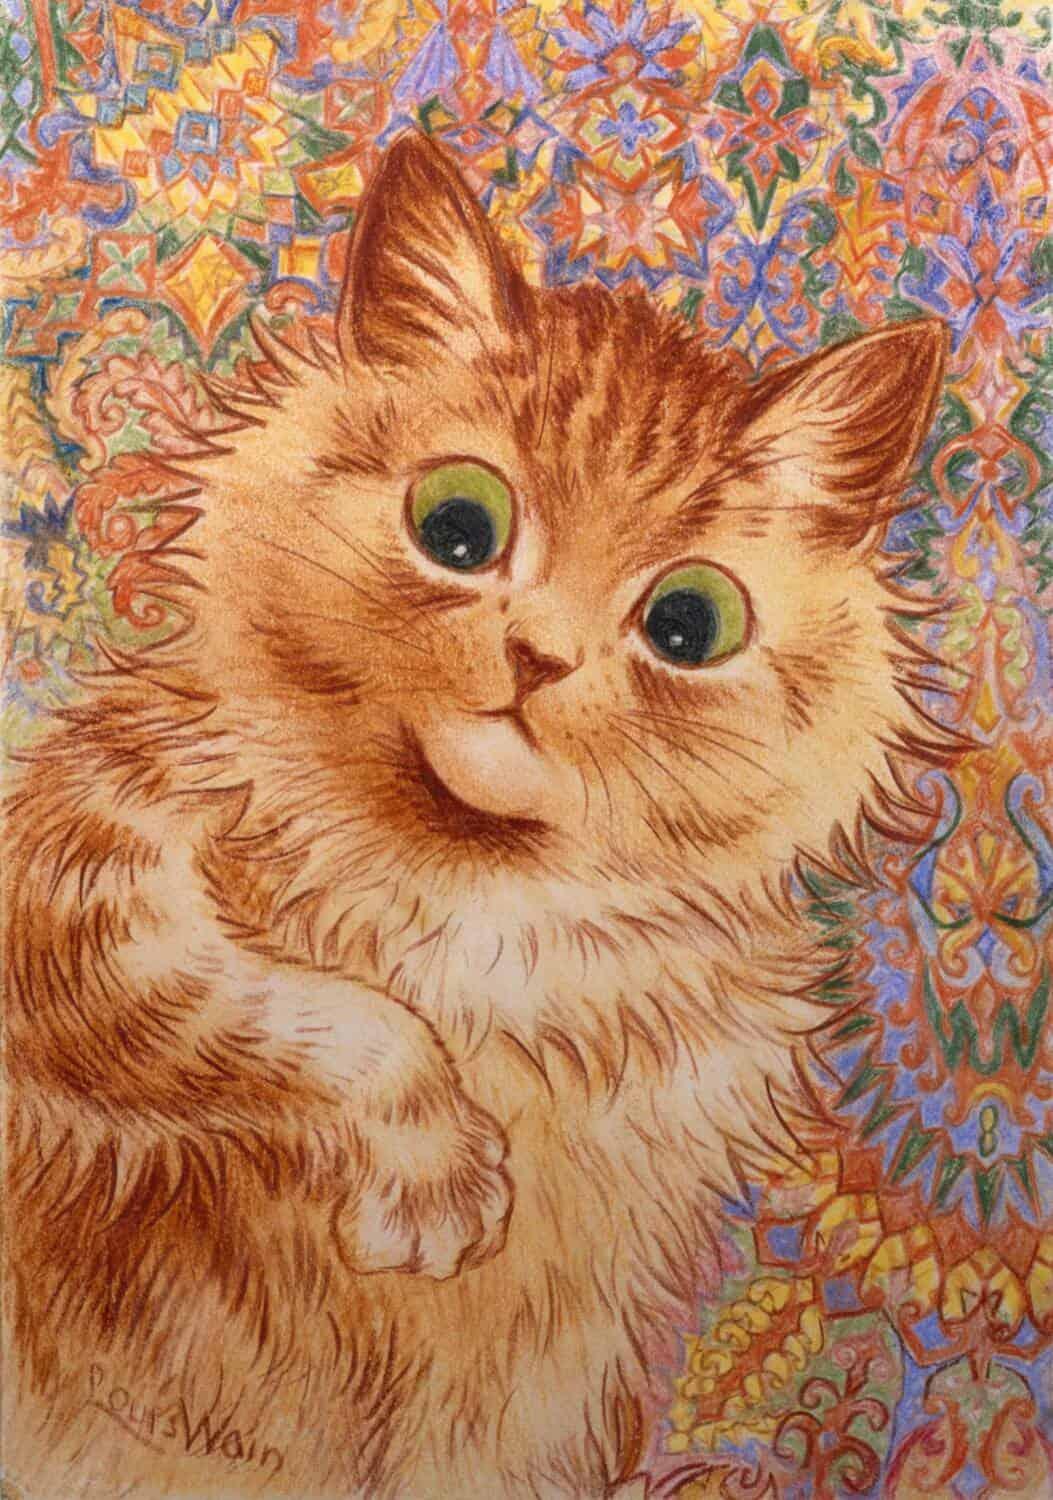 3 louis wain ginger cat 1931 courtesy of bethlem museum of the mind